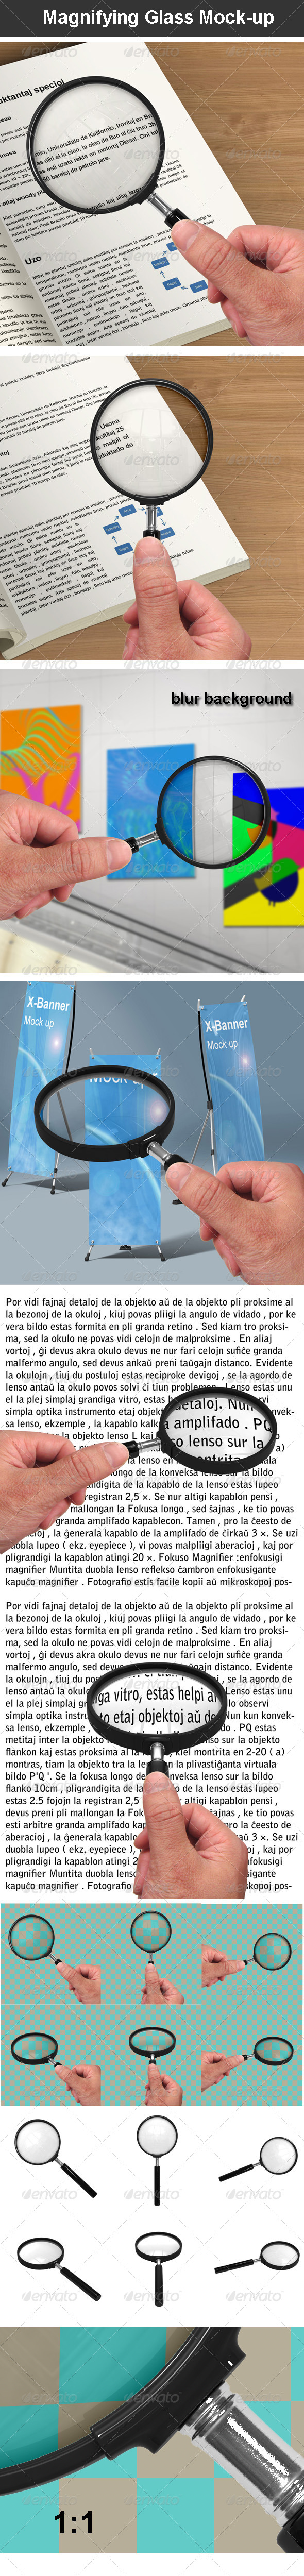 Magnifying Glass Mock-up